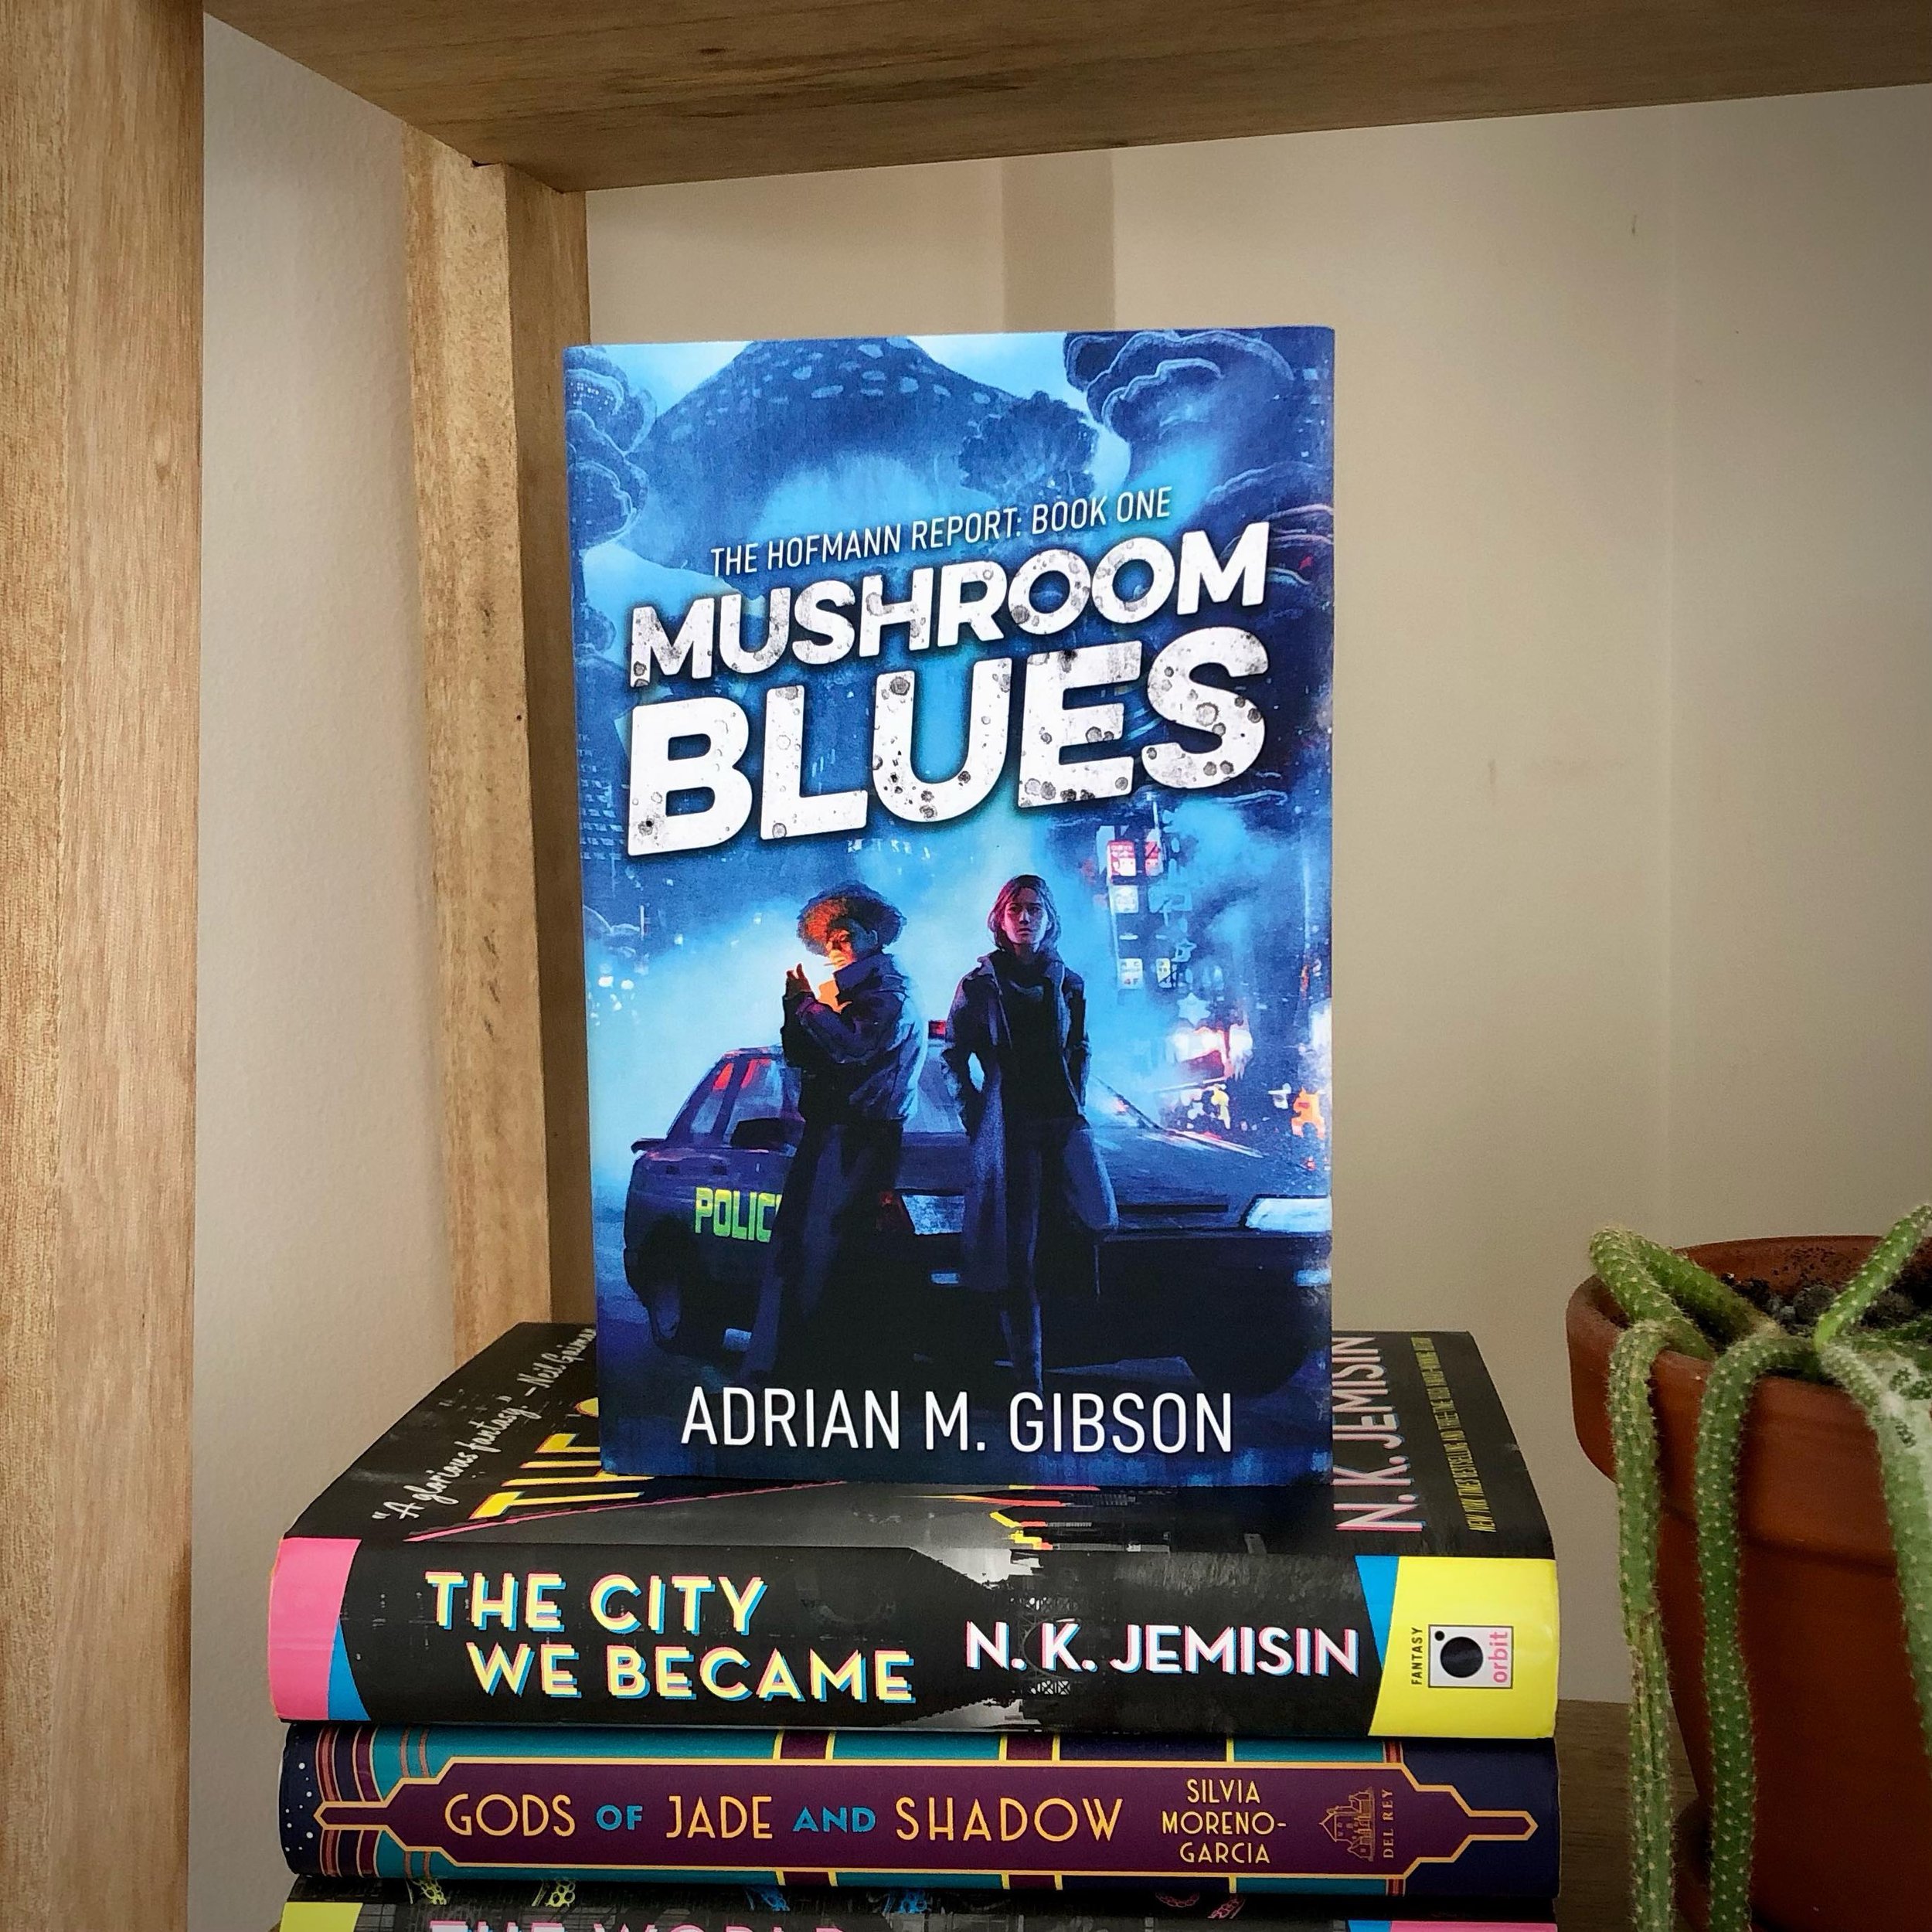 Found a home for my #MushroomBlues hardcover on the shelf! Check the book out if you like:
🍄 Fungi
🔎 Police procedurals
🏃&zwj;♂️ Fast pace
👁️ Psychedelics
😱 Body horror

BUY IT TODAY in paperback/hardcover/eBook on Amazon or read it on Kindle Un